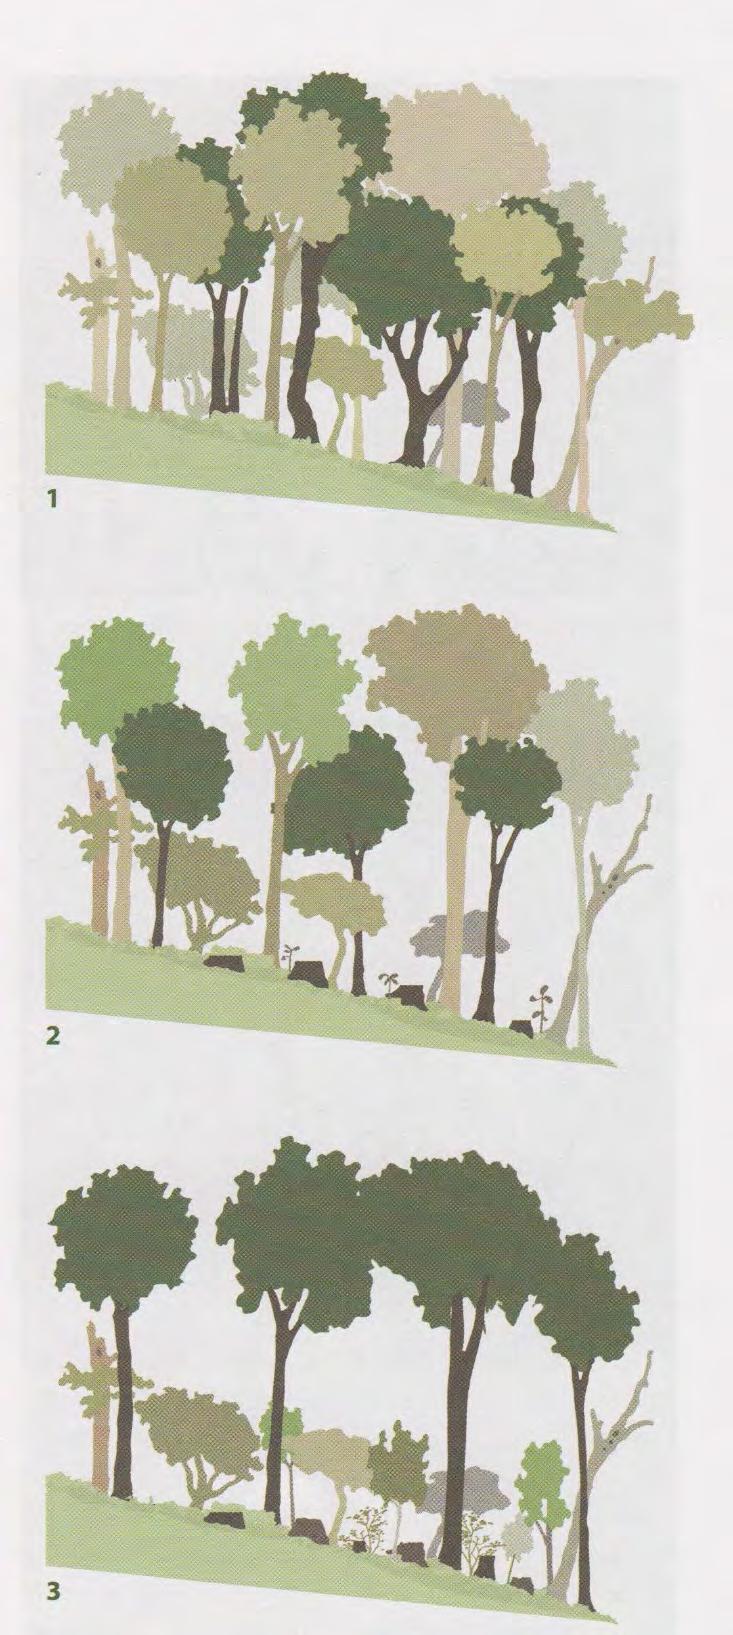 Successful Thinning 1) Remove trees with dark trunks (inferior and/or weak) 2) Remove trees